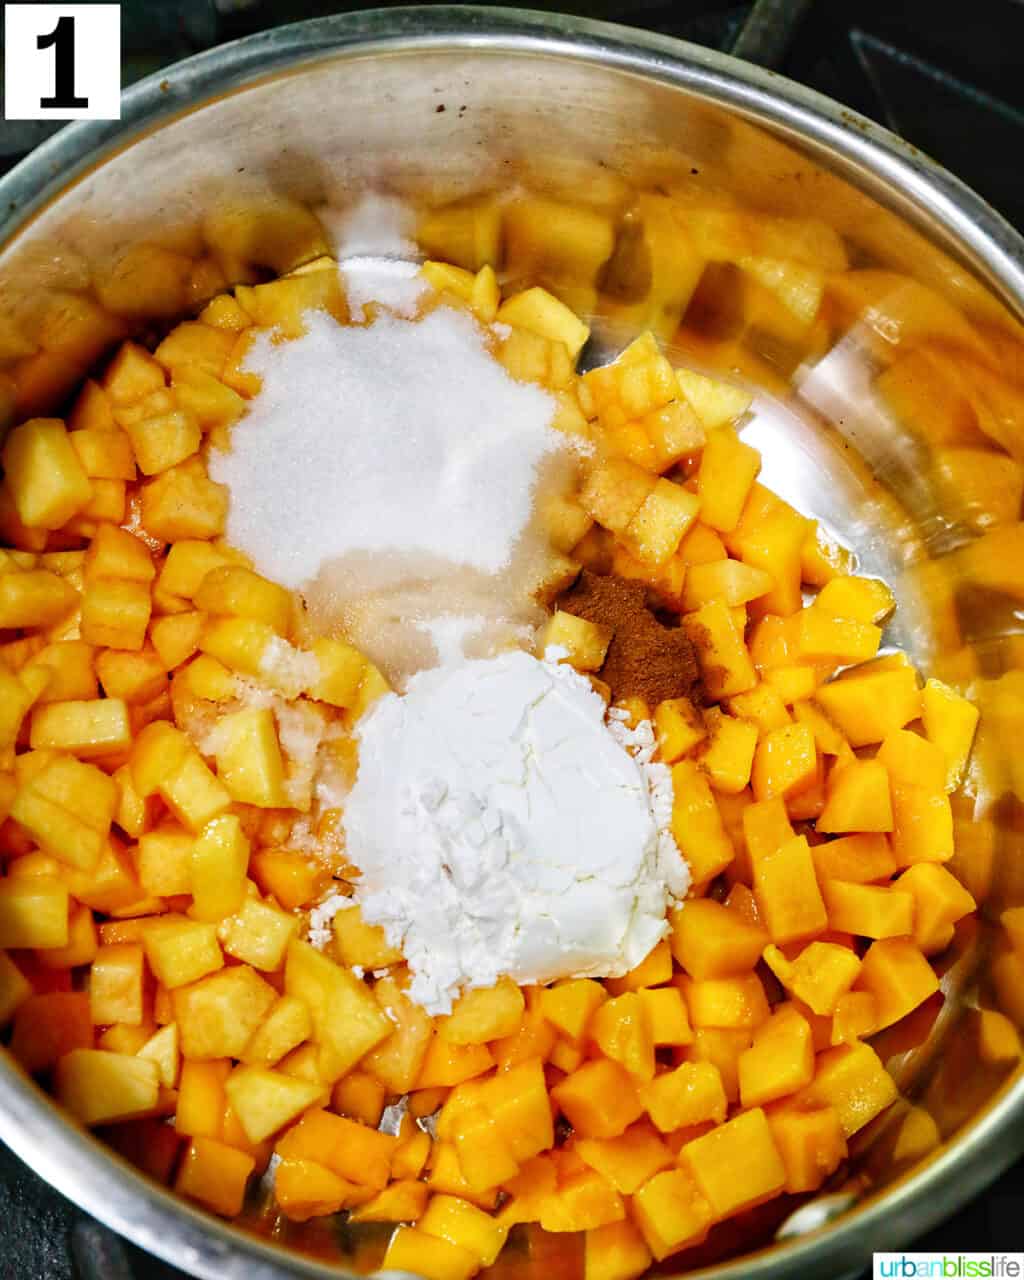 diced peaches and mangoes with cornstarch and cinnamon in a saucepan.